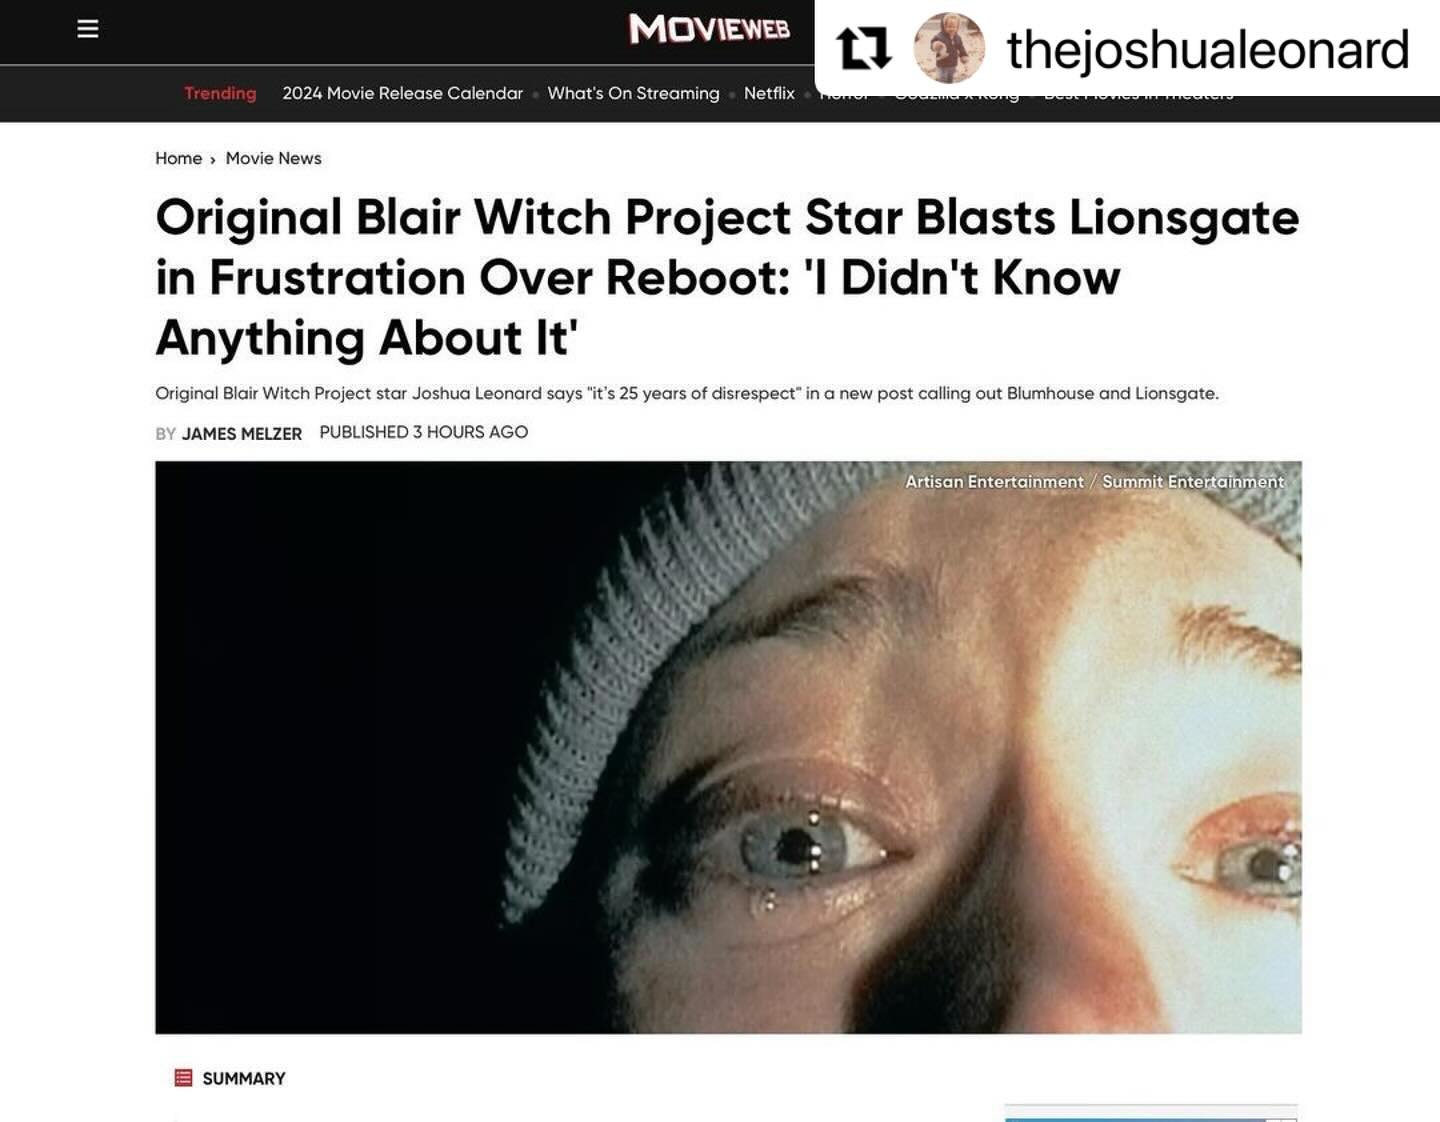 #Reposting info below regarding systemic disrespect concerning revival of The Blair With Project, which starred two actors with Hudson Valley connections, as well as other local connections.

Below is from @thejoshualeonard 
・・・
Please continue to re